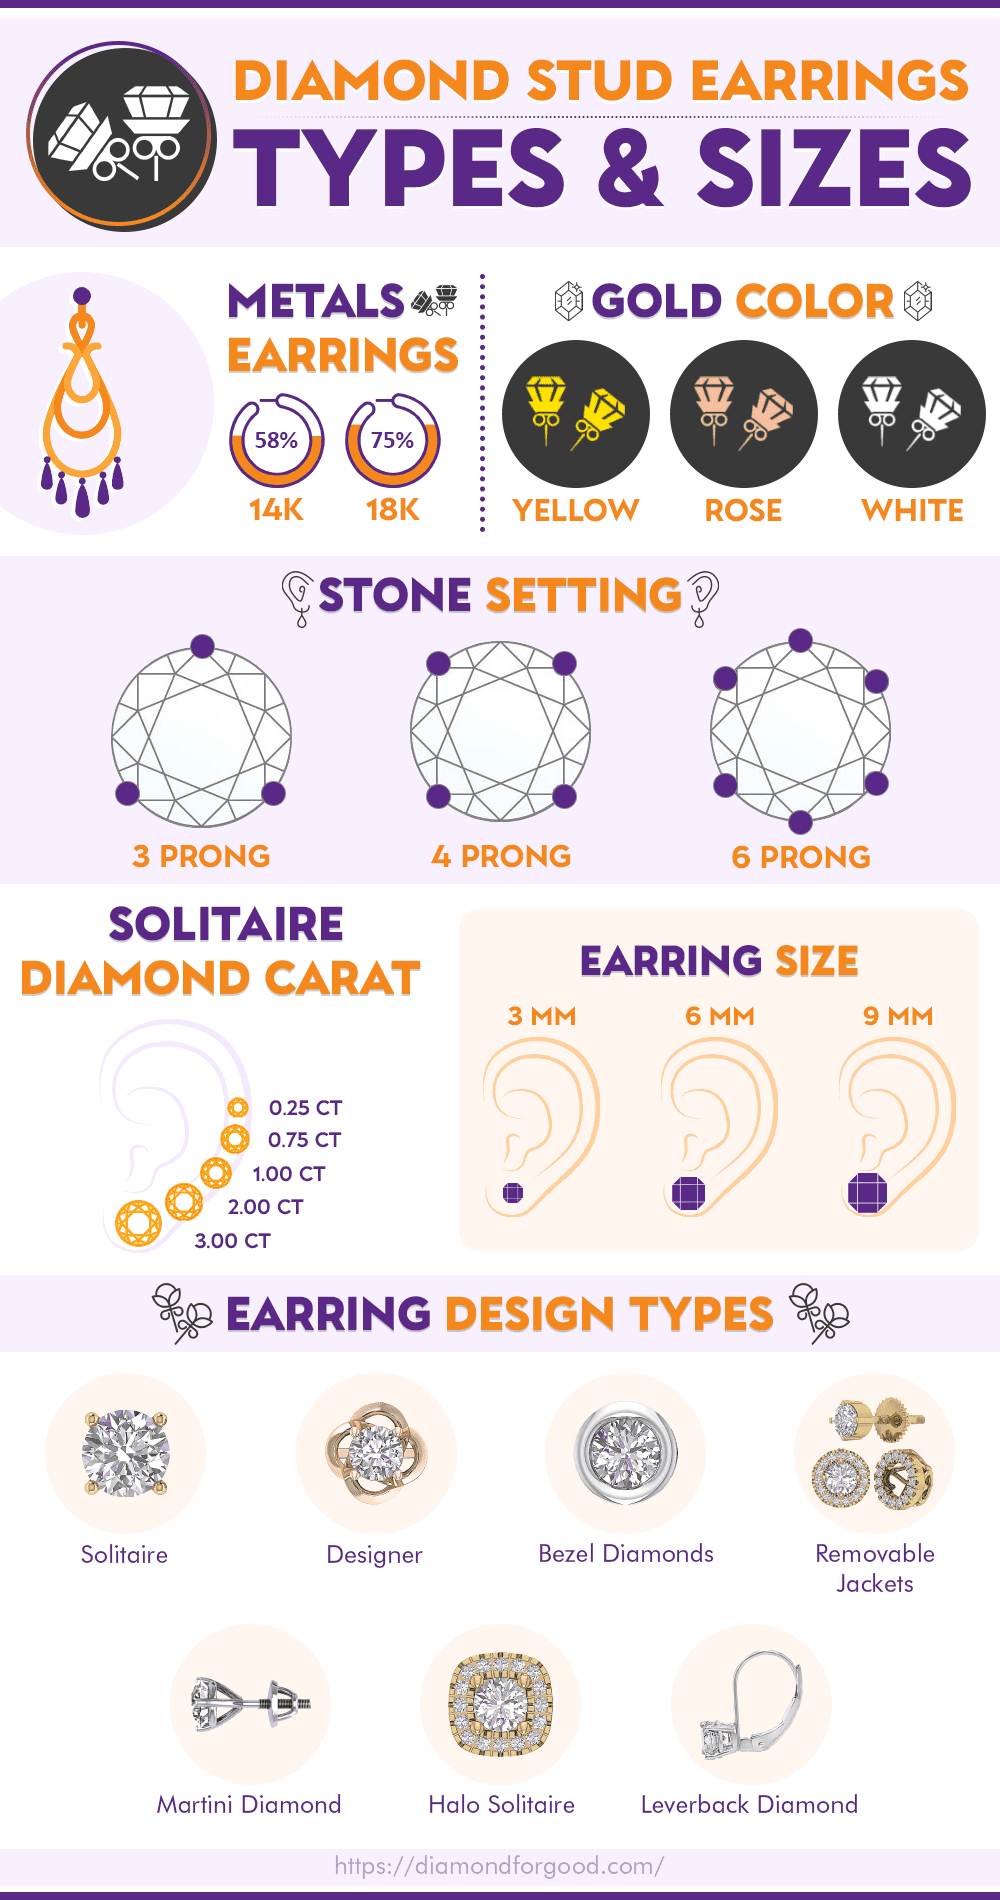 Diamond Stud Earrings Size and Types